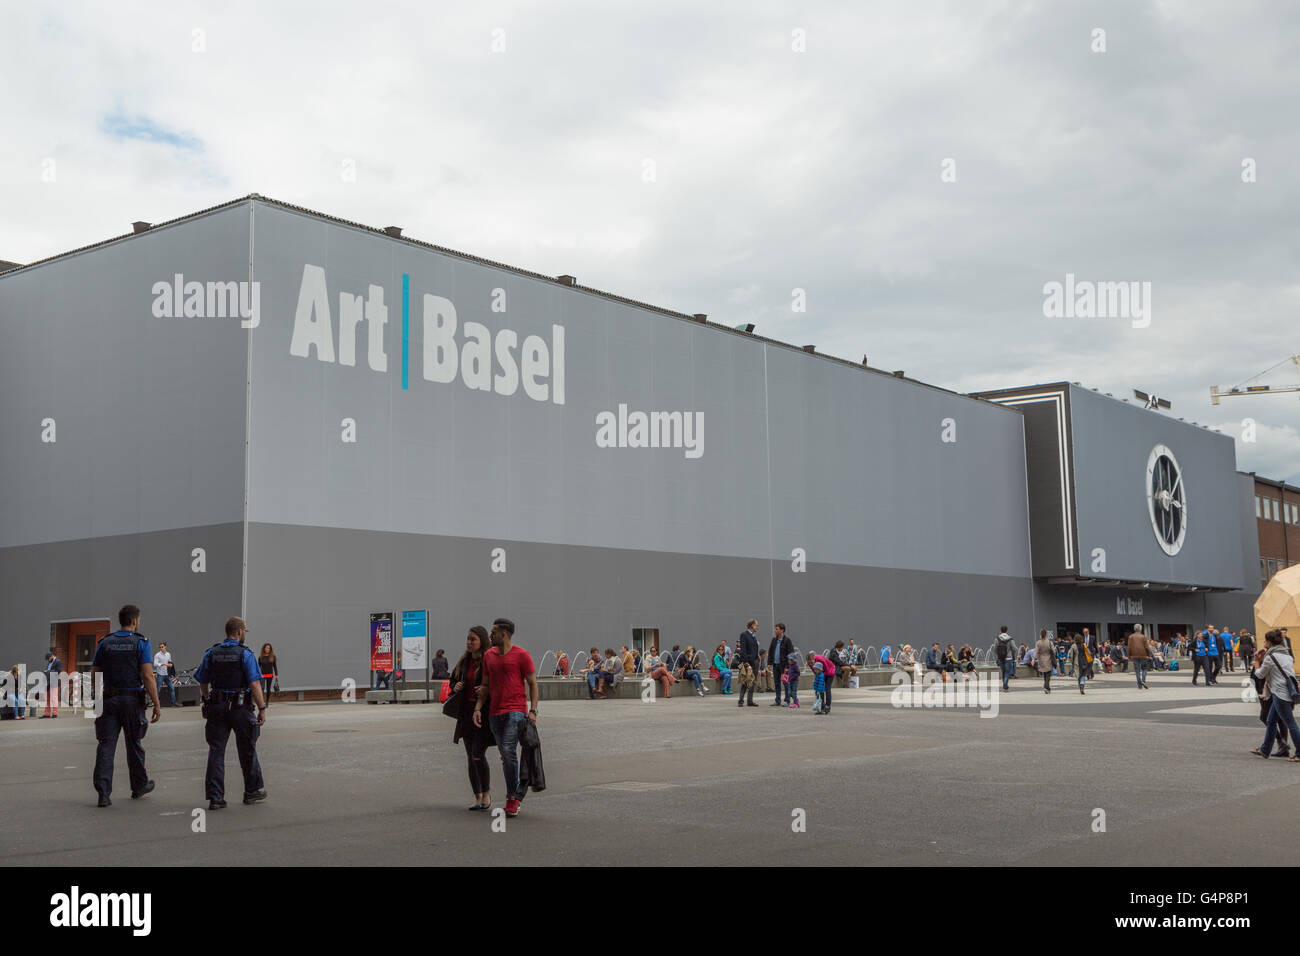 Basel, Switzerland. 19th June, 2016. Art Basel 2016, Basel, Switzerland. Since 1970, Art Basel’s goal has been to connect the world's premier galleries and their patrons, as well serving as a meeting point for the international art world. Credit:  Stephen Allen/Alamy Live News. Stock Photo